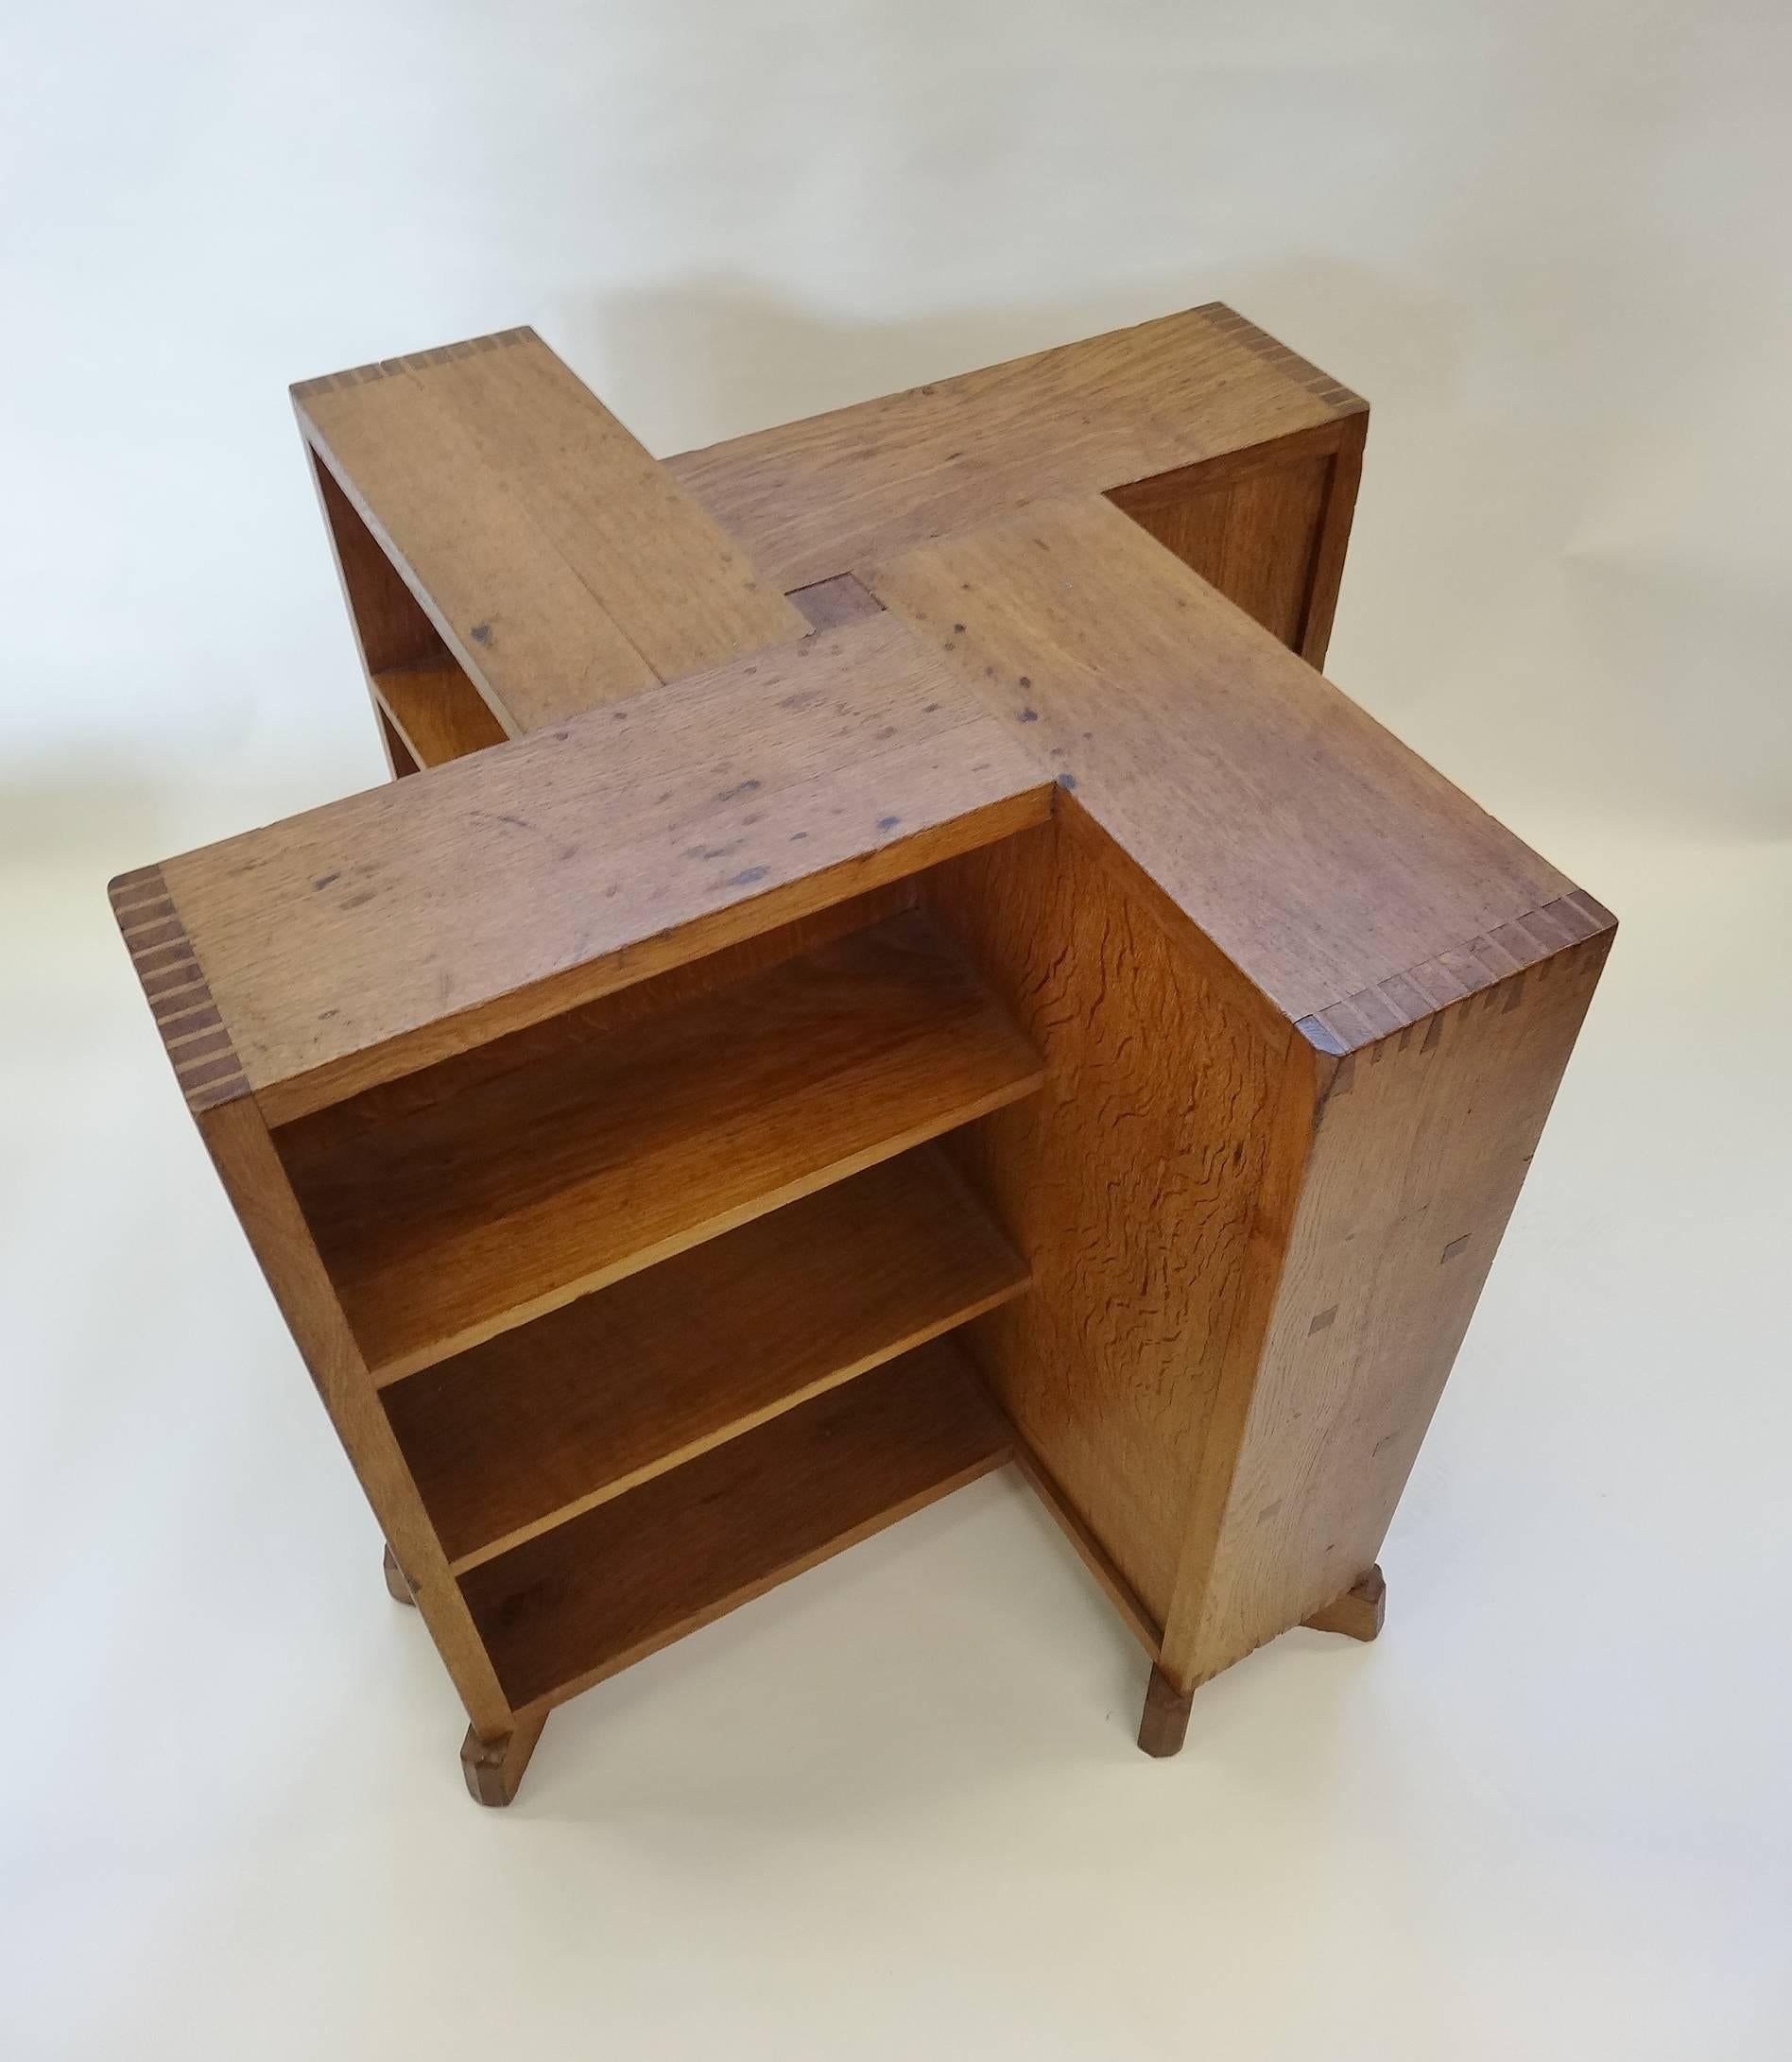 Superb and extremely rare (possibly a one-off commissioned piece) early Arts & Crafts Cotswold School, circa mid-late 1920s oak bookcase/ book table by Gordon Russell of Broadway, Worcs, England.
Unlike the production model Gordon Russell book